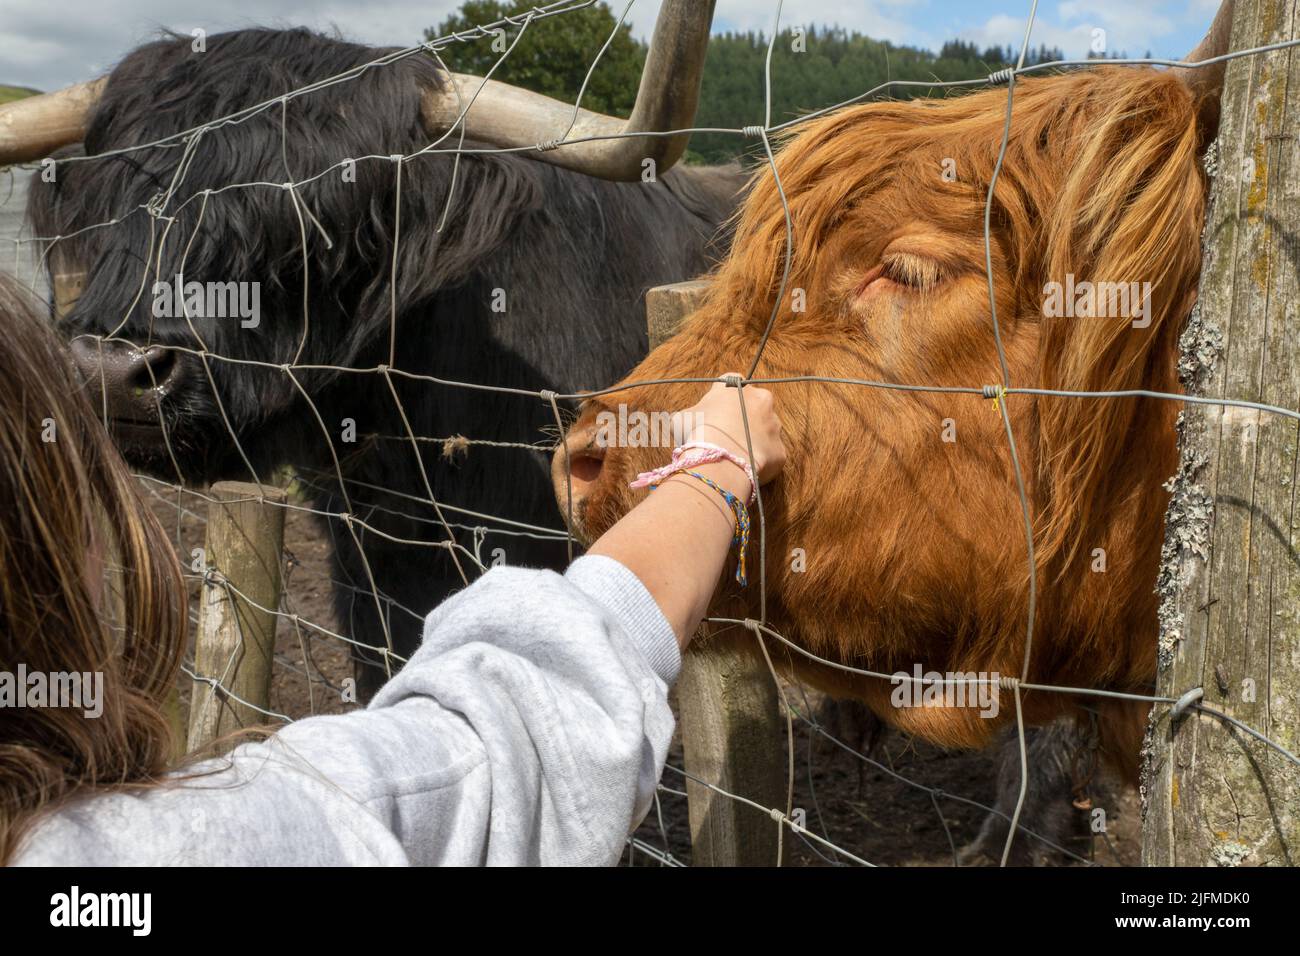 Highland cattle or Highland cow it's a Scottish breed of rustic cattle. It originated in the Scottish Highlands and the Outer Hebrides. Stock Photo